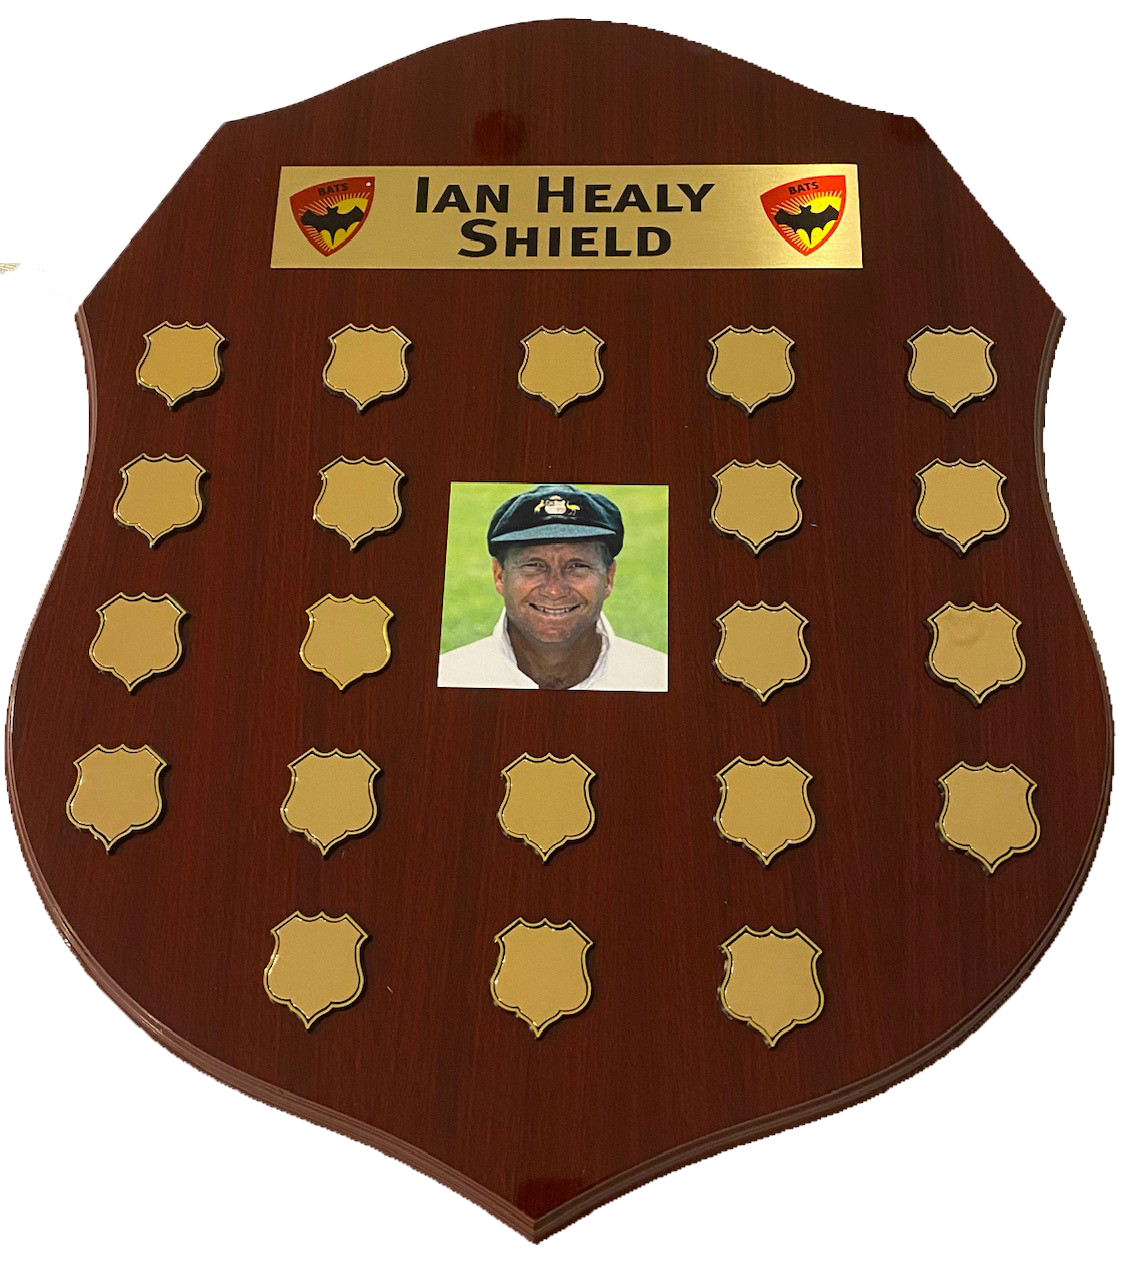 The Ian Healy Shield. Dark brown wooden sheld with 20 places to engrave annual match results. Has a phto of Ian Healy in the centrer of the shiield.